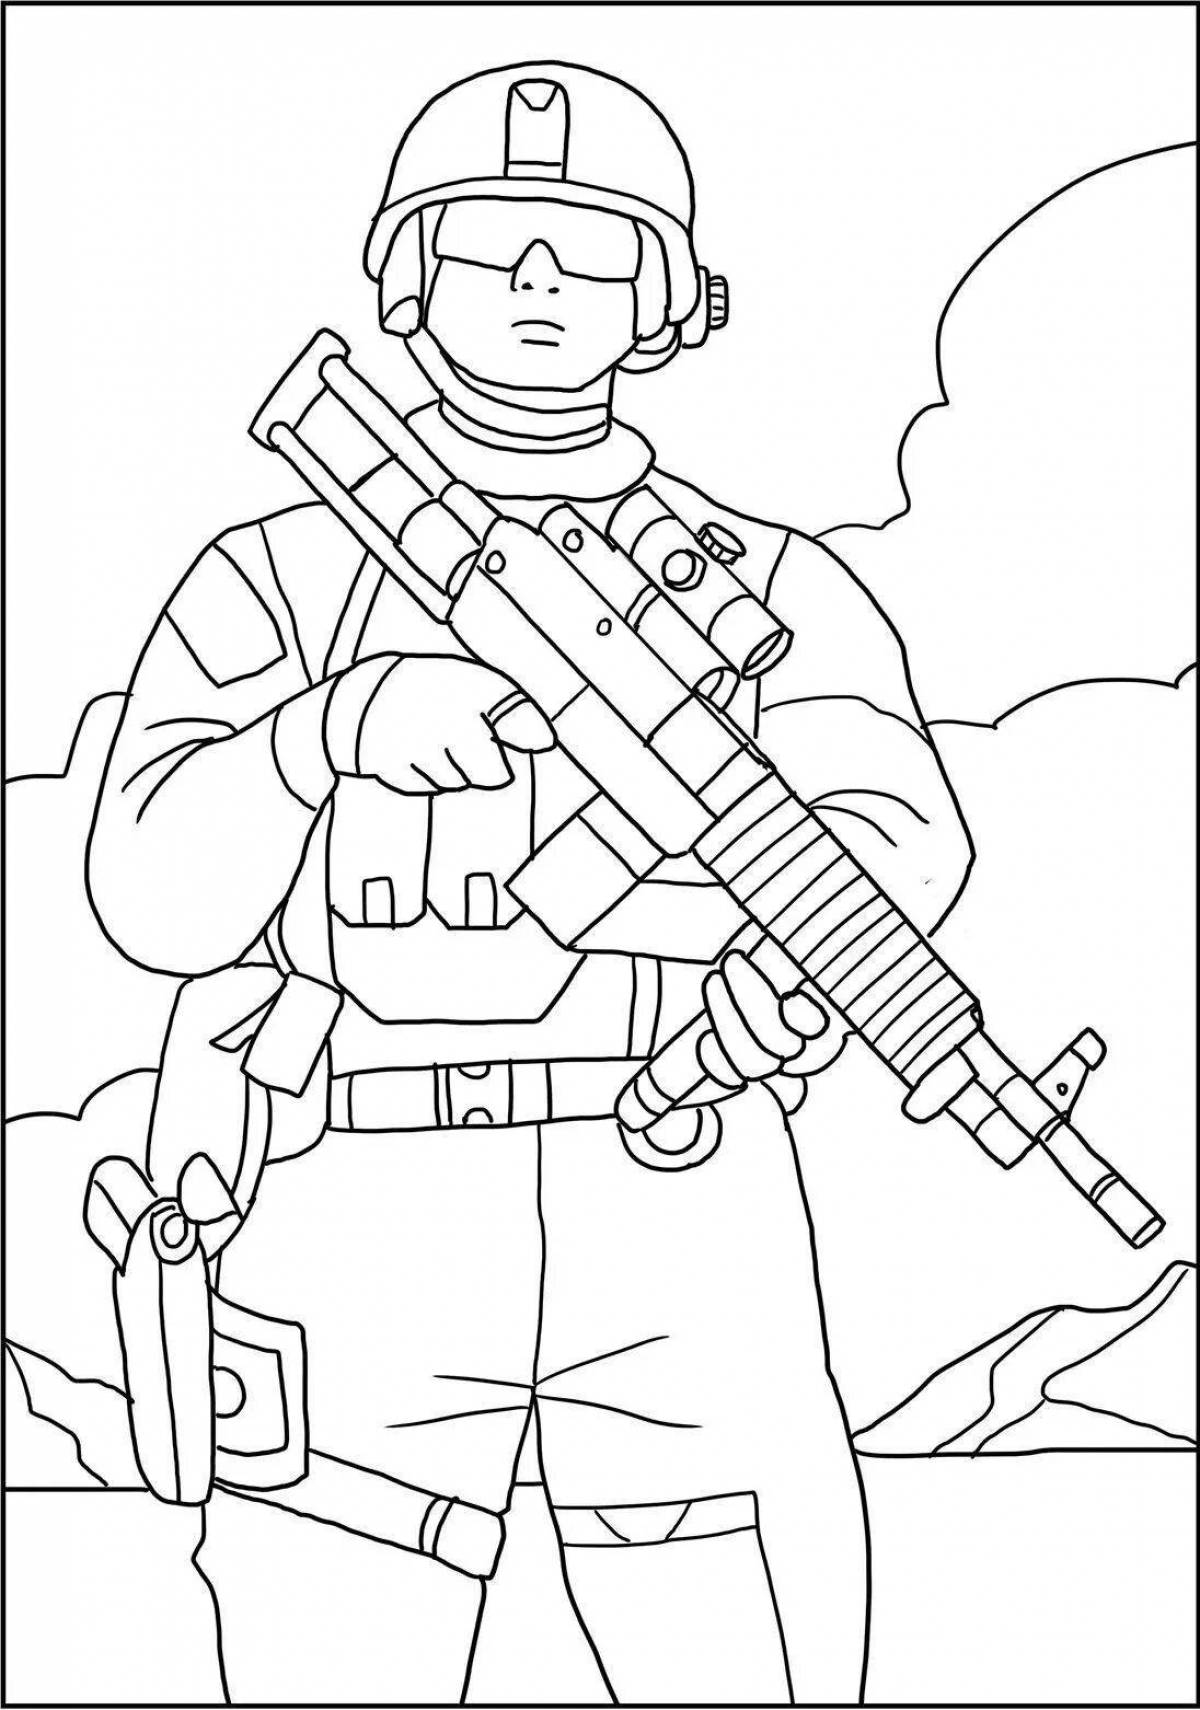 Charming military coloring book for kids